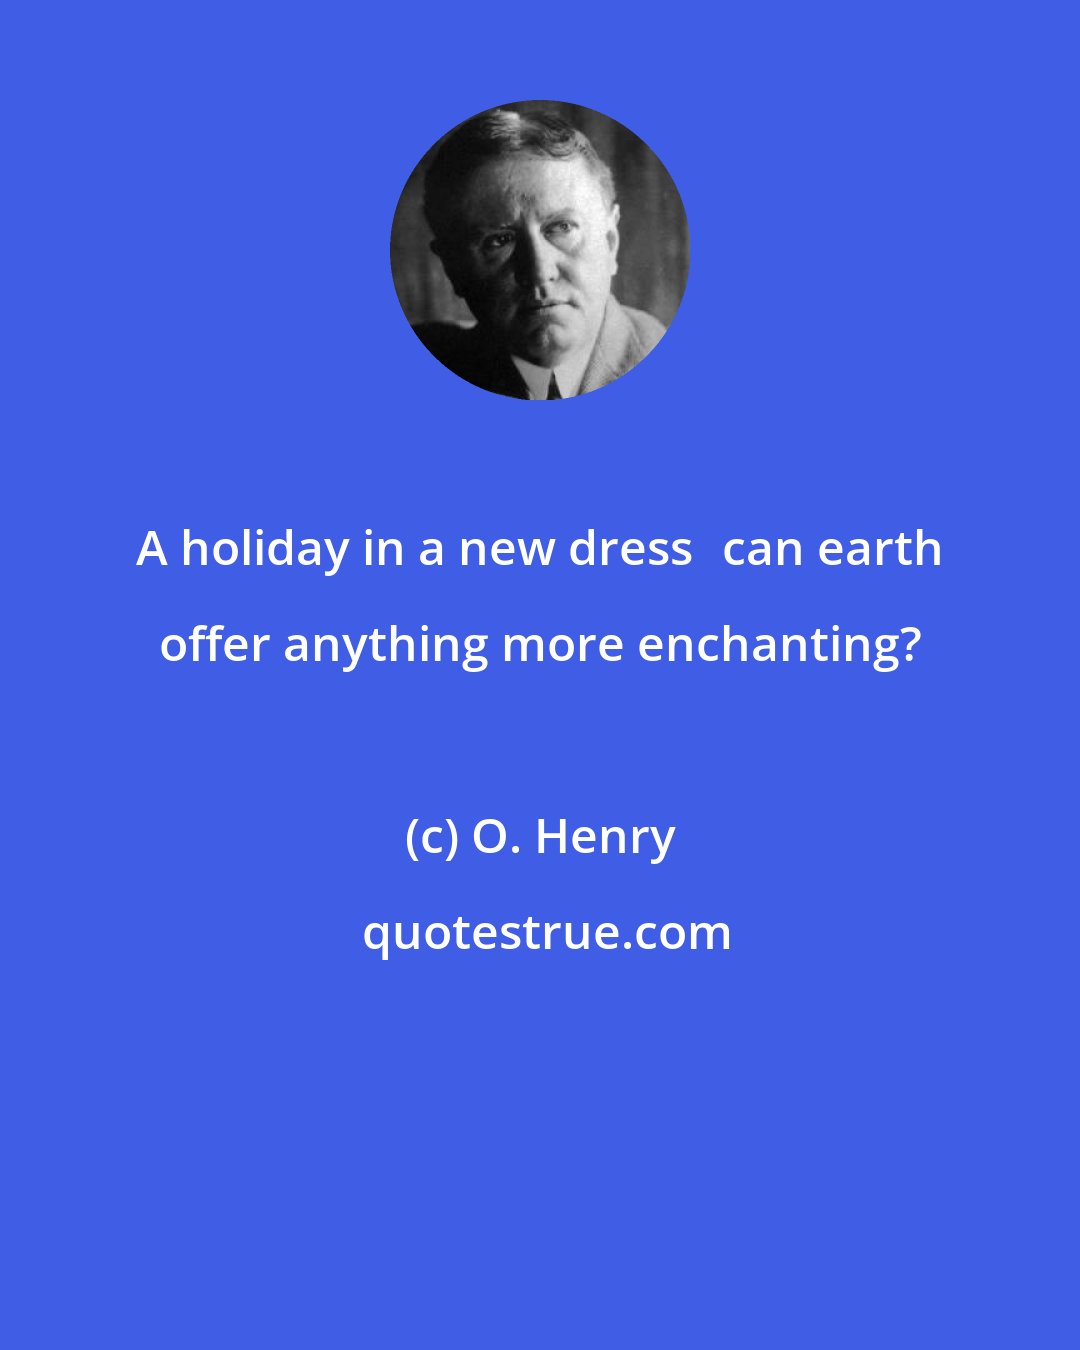 O. Henry: A holiday in a new dresscan earth offer anything more enchanting?